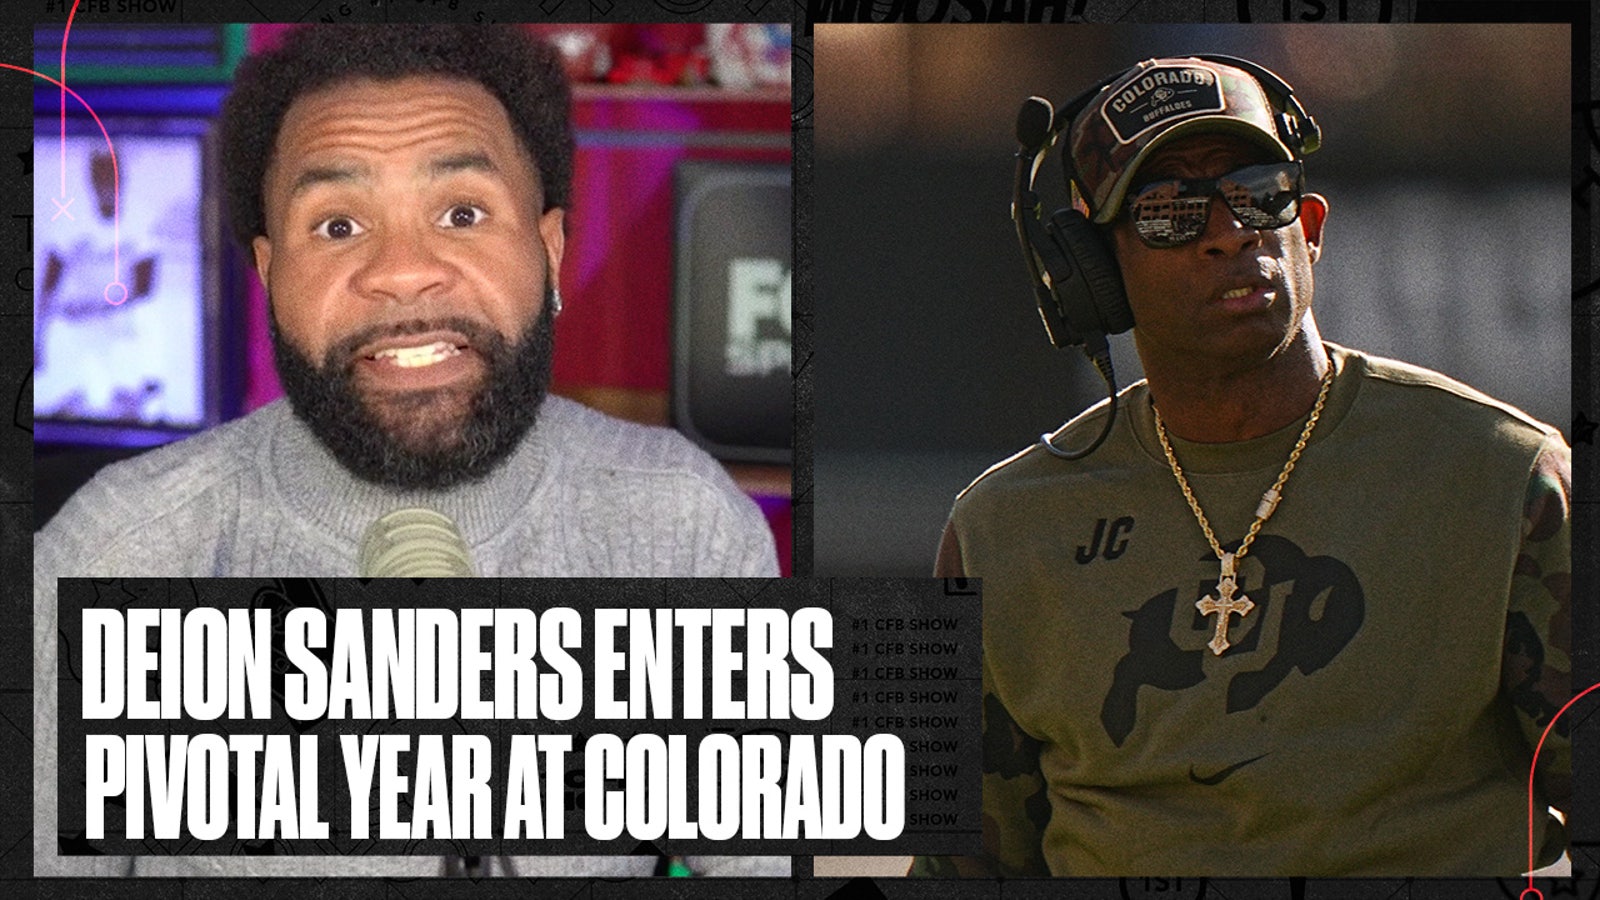 How will the Buffs fare in Year 2 under Deion Sanders?